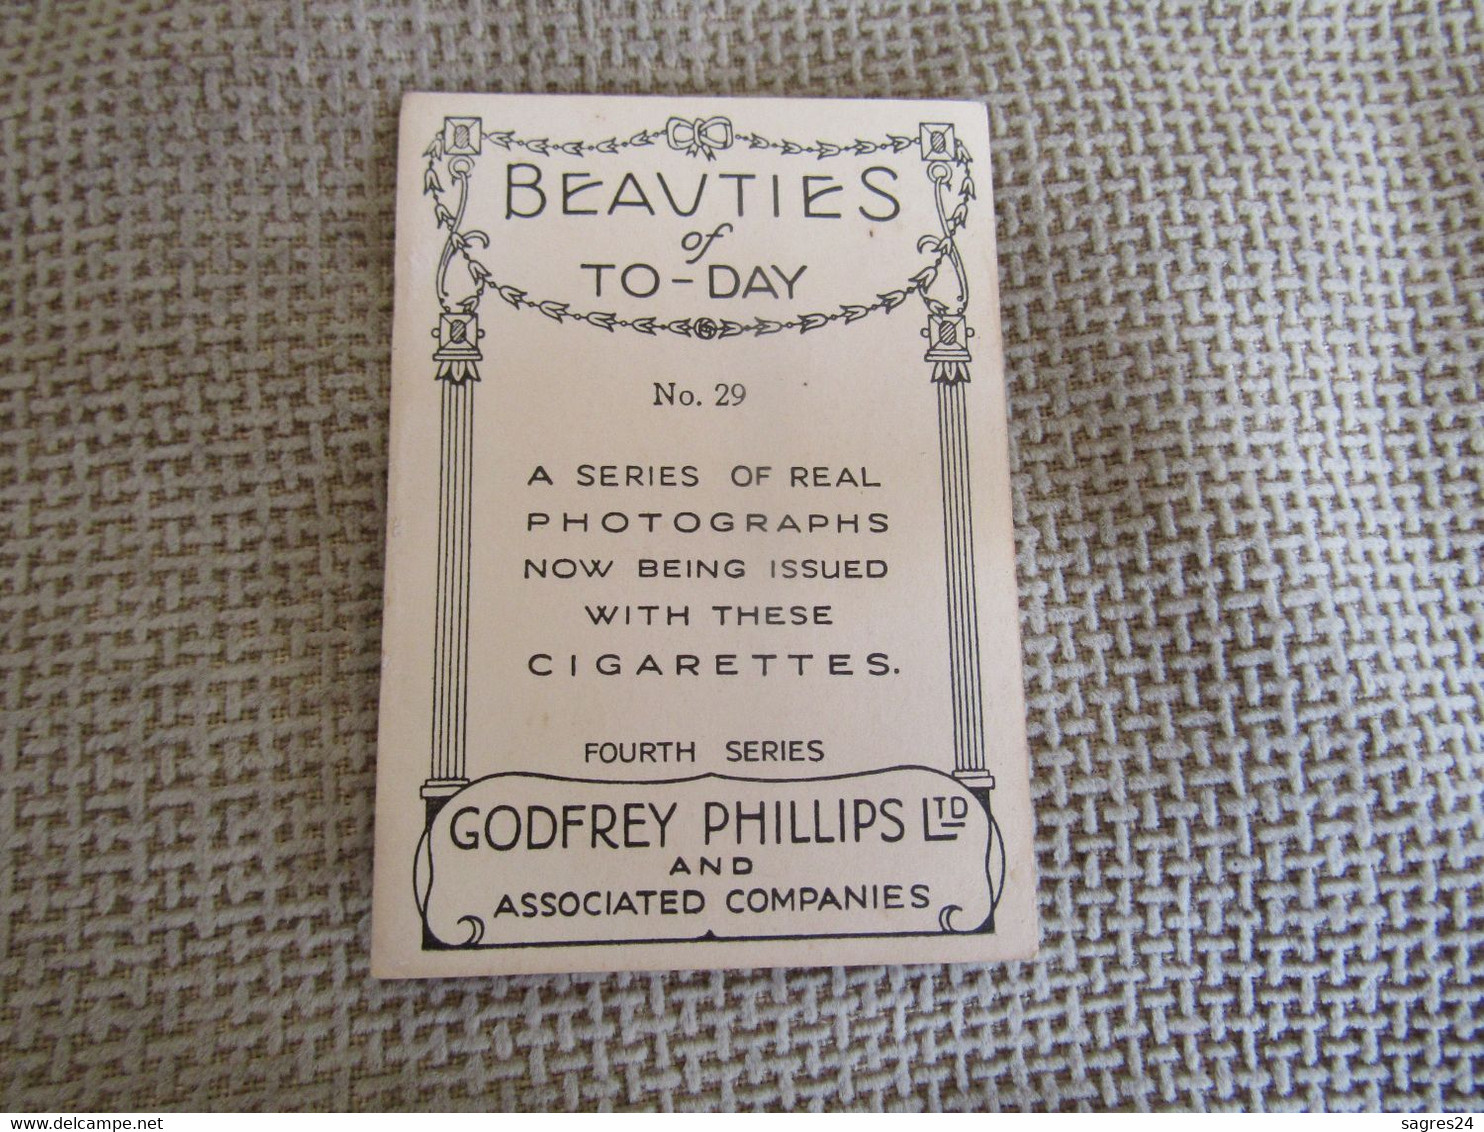 Chromo Cigarettes Beauties Of To-Day Nº 29 Mary Maguire - Godfrey Phillips Ltd Fourth Series 1938 - Phillips / BDV